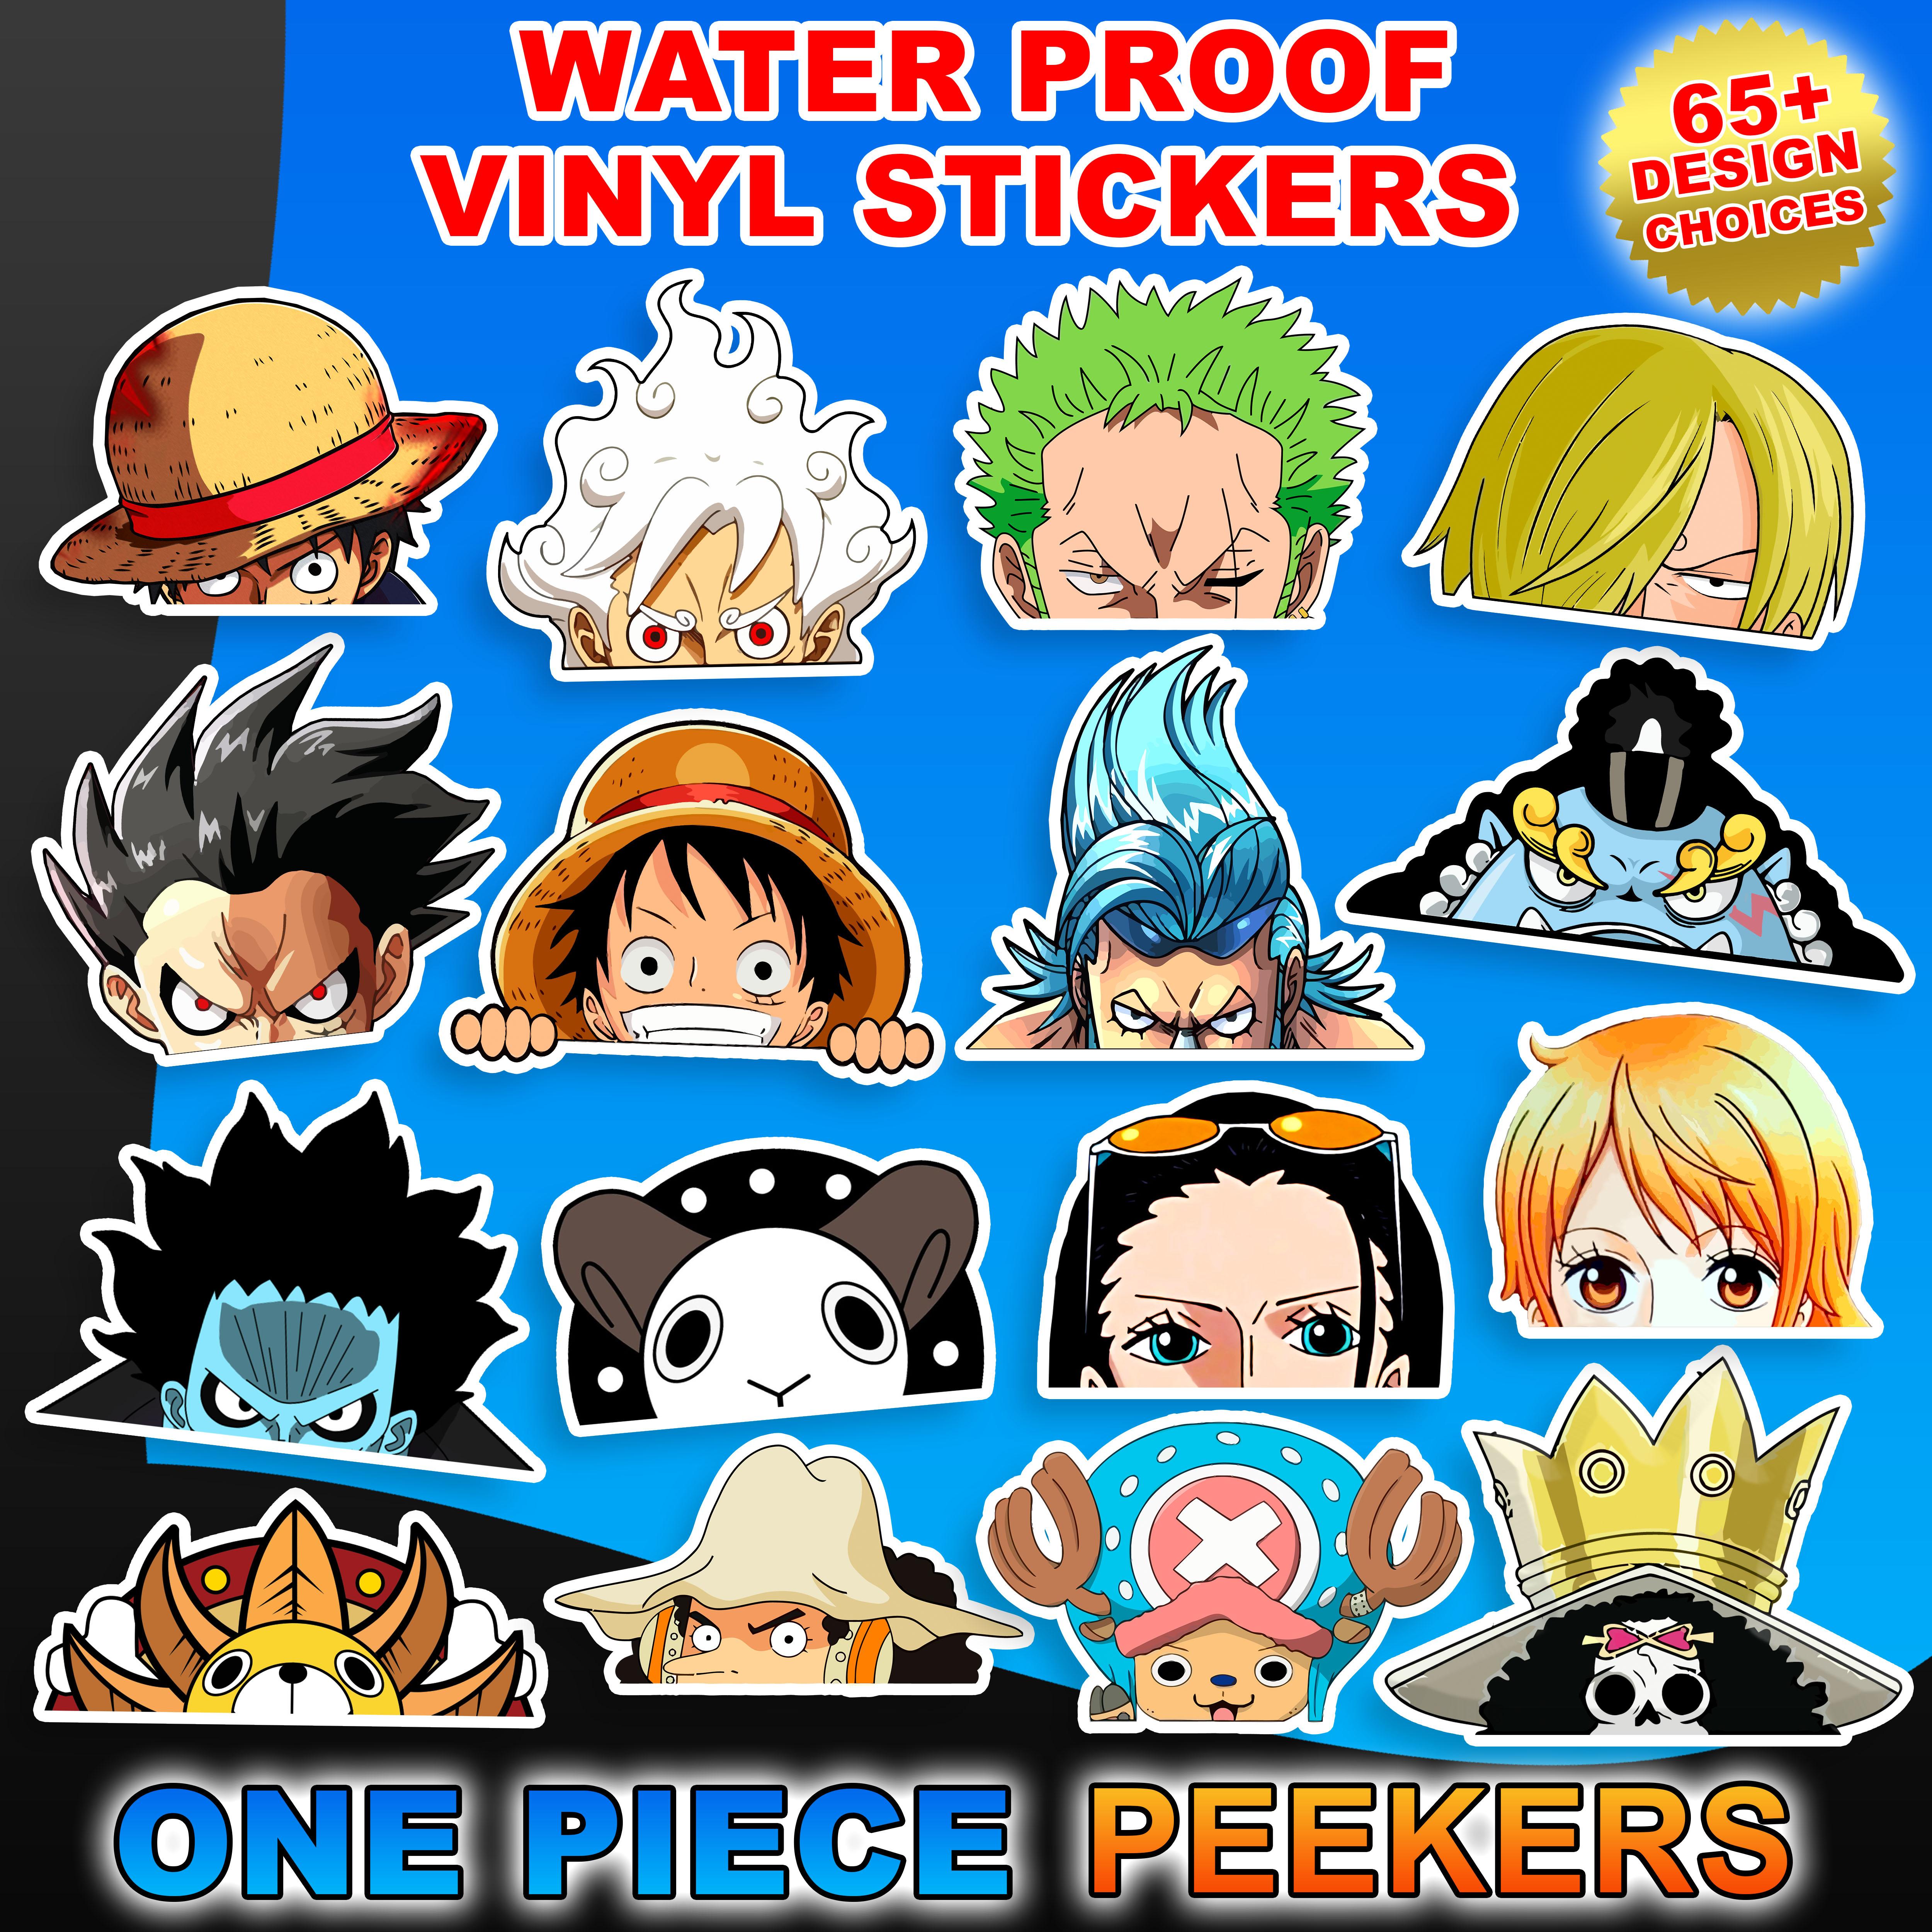 One Piece Stickers for Sale